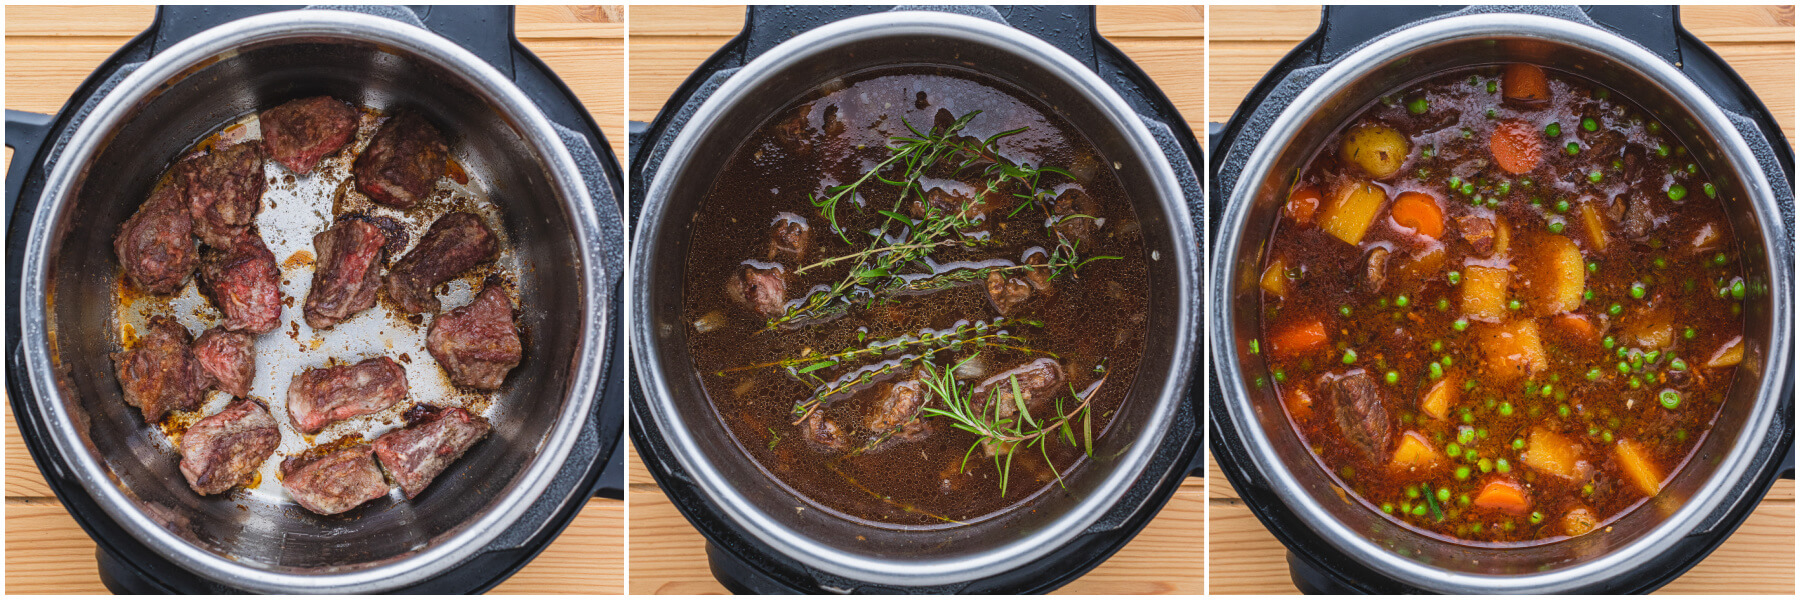 Process images showing how to make beef stew in an Instant Pot.